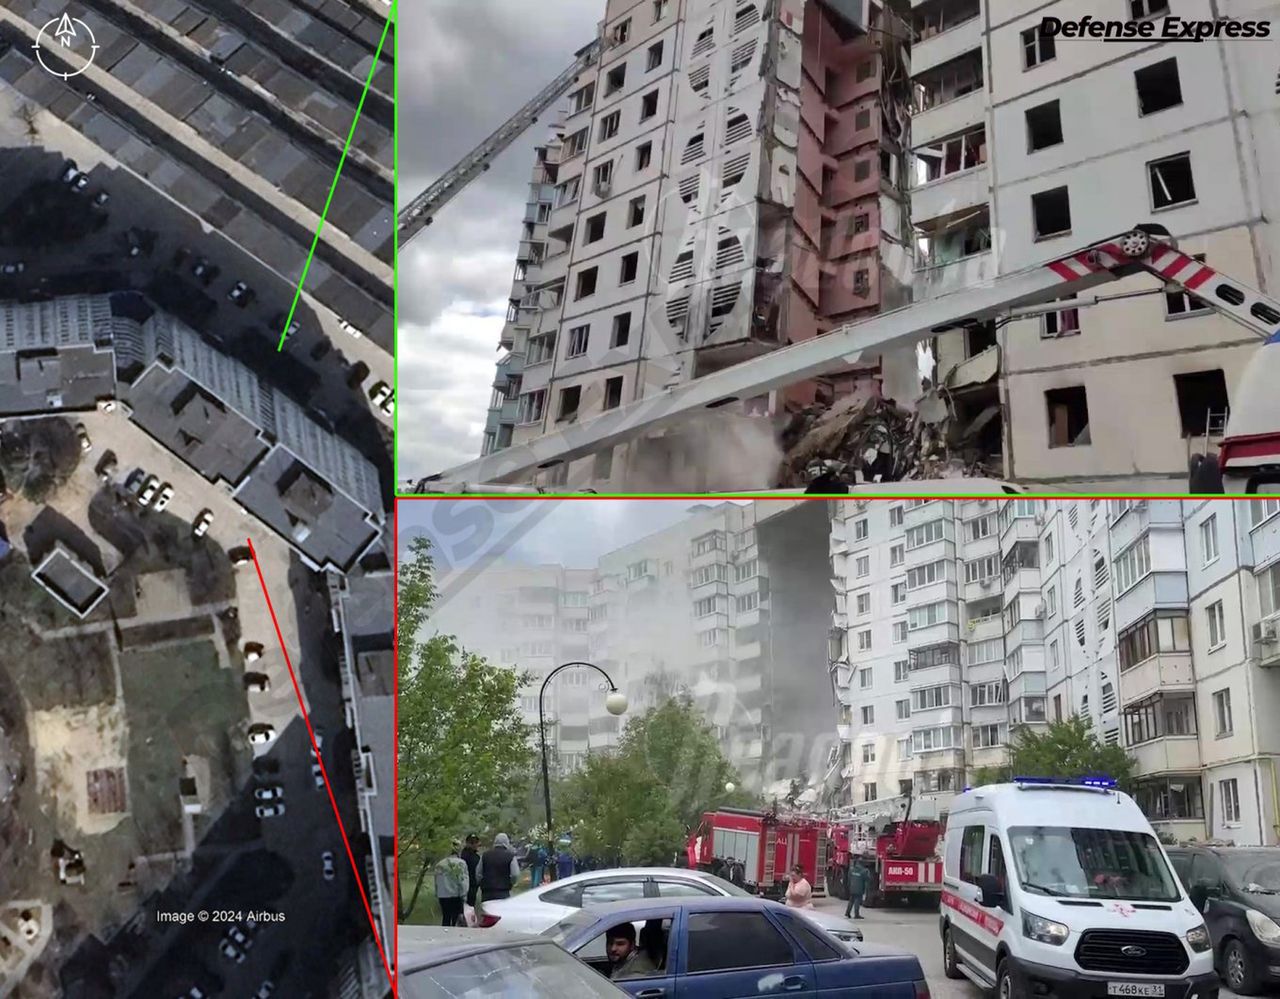 Experts from the Defense Express service suggest that the building could have been destroyed by a missile fired from Russia.